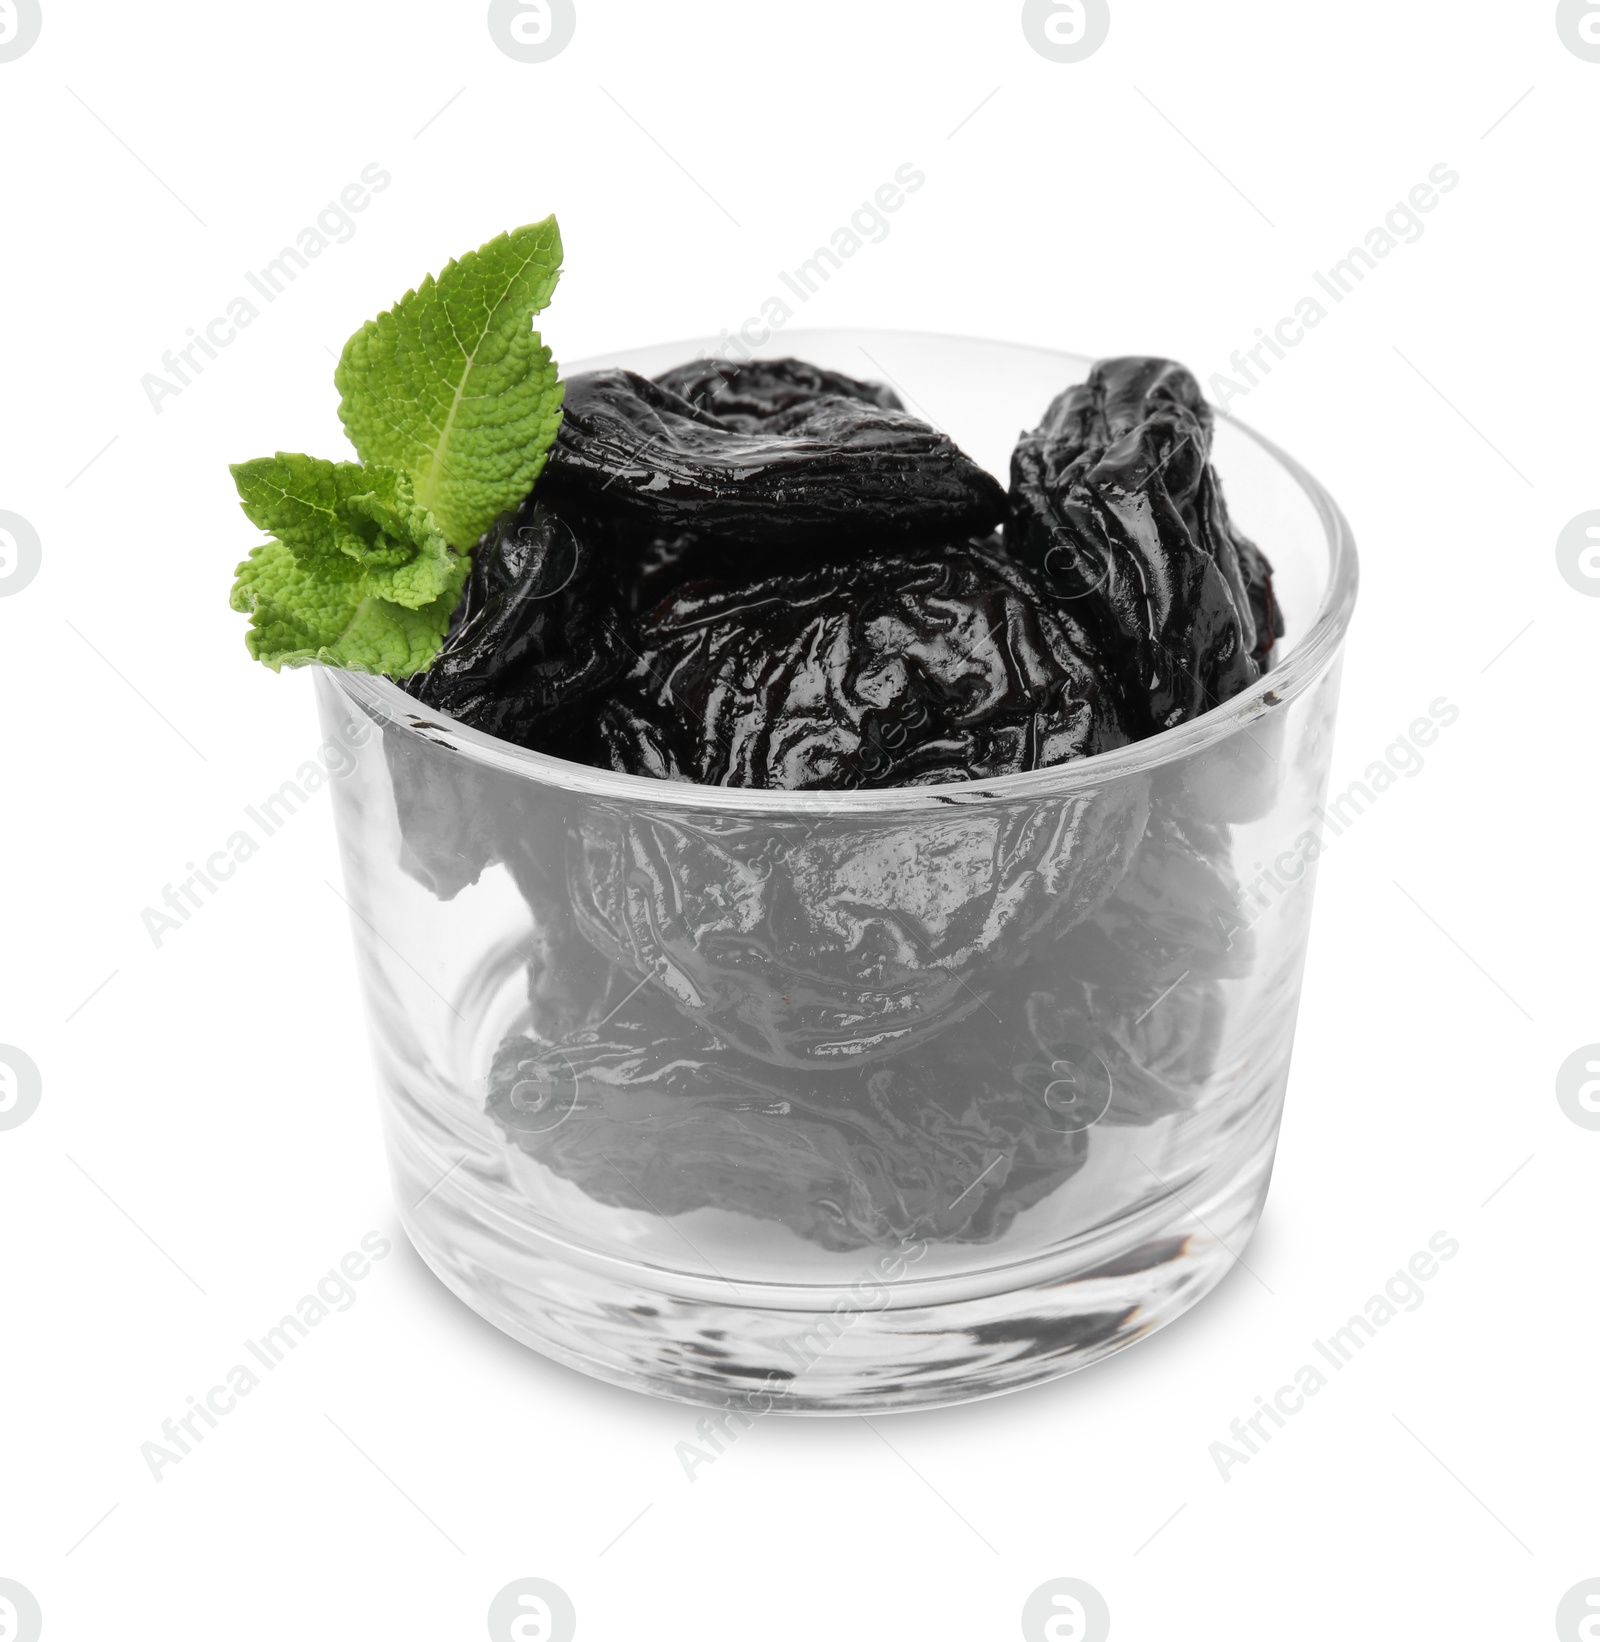 Photo of Tasty dried plums (prunes) in glass bowl and mint leaves isolated on white